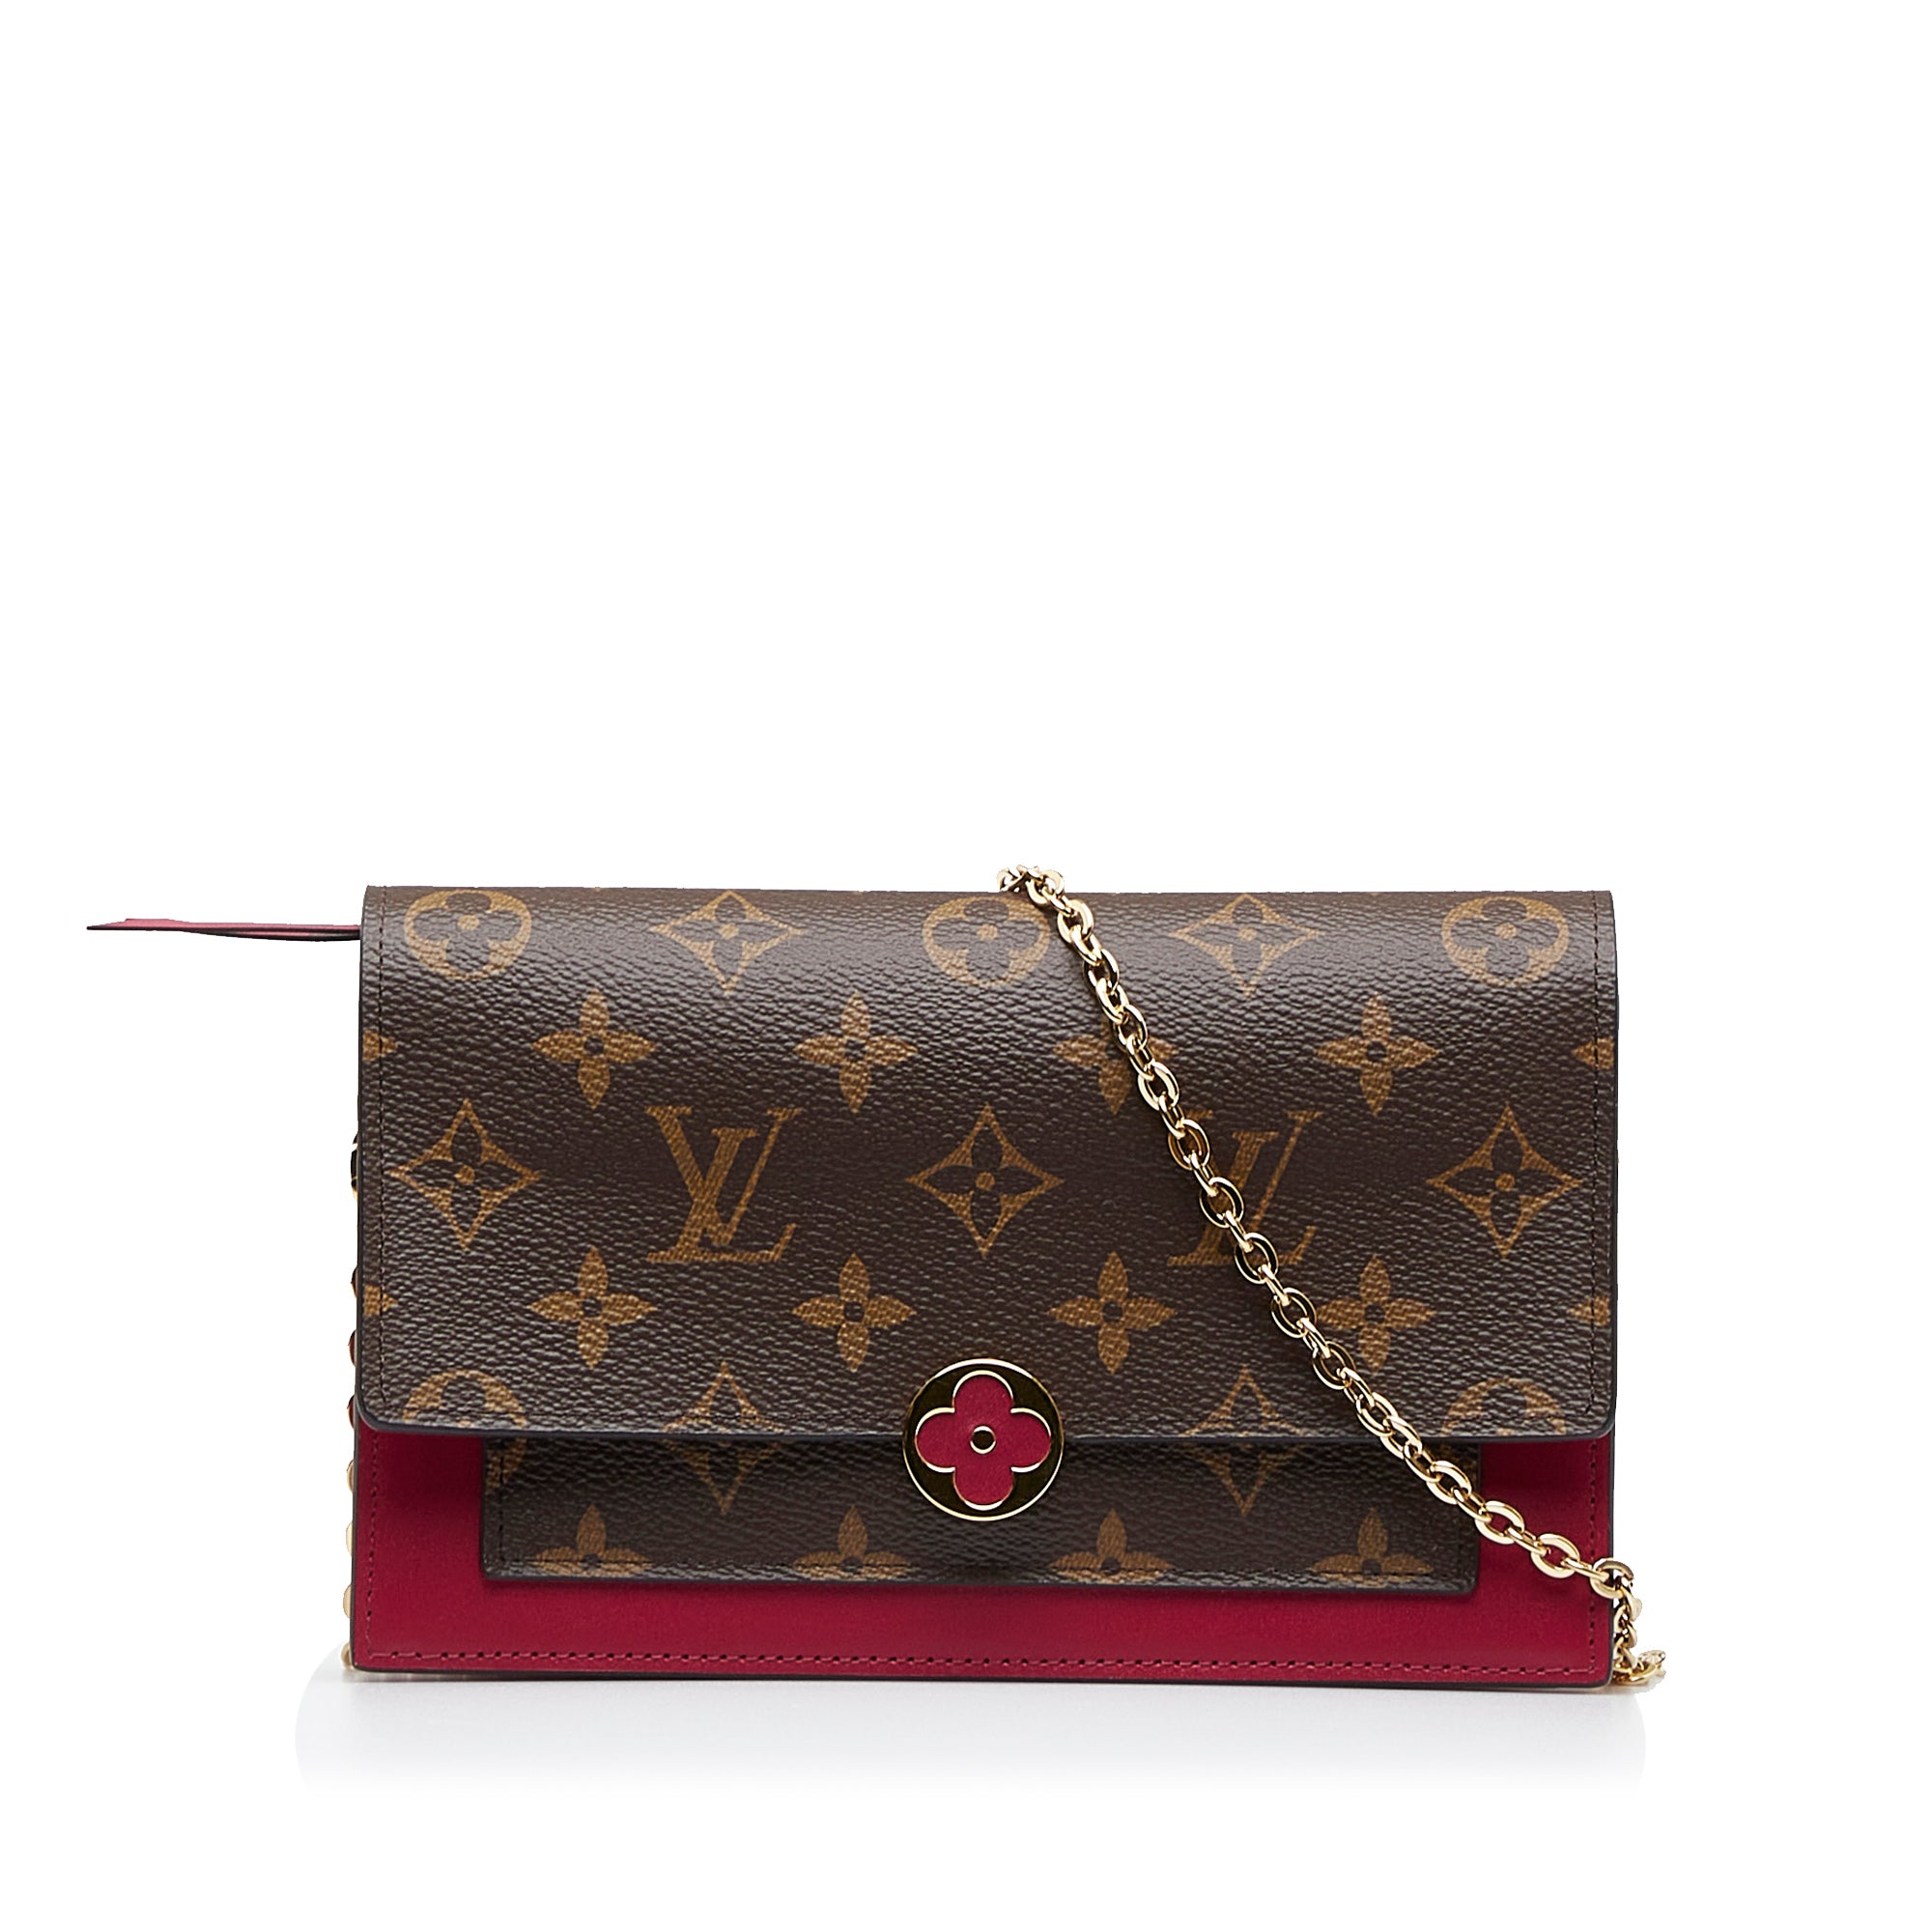 Pre-Owned Authenticated Louis Vuitton Monogram Flore Wallet On